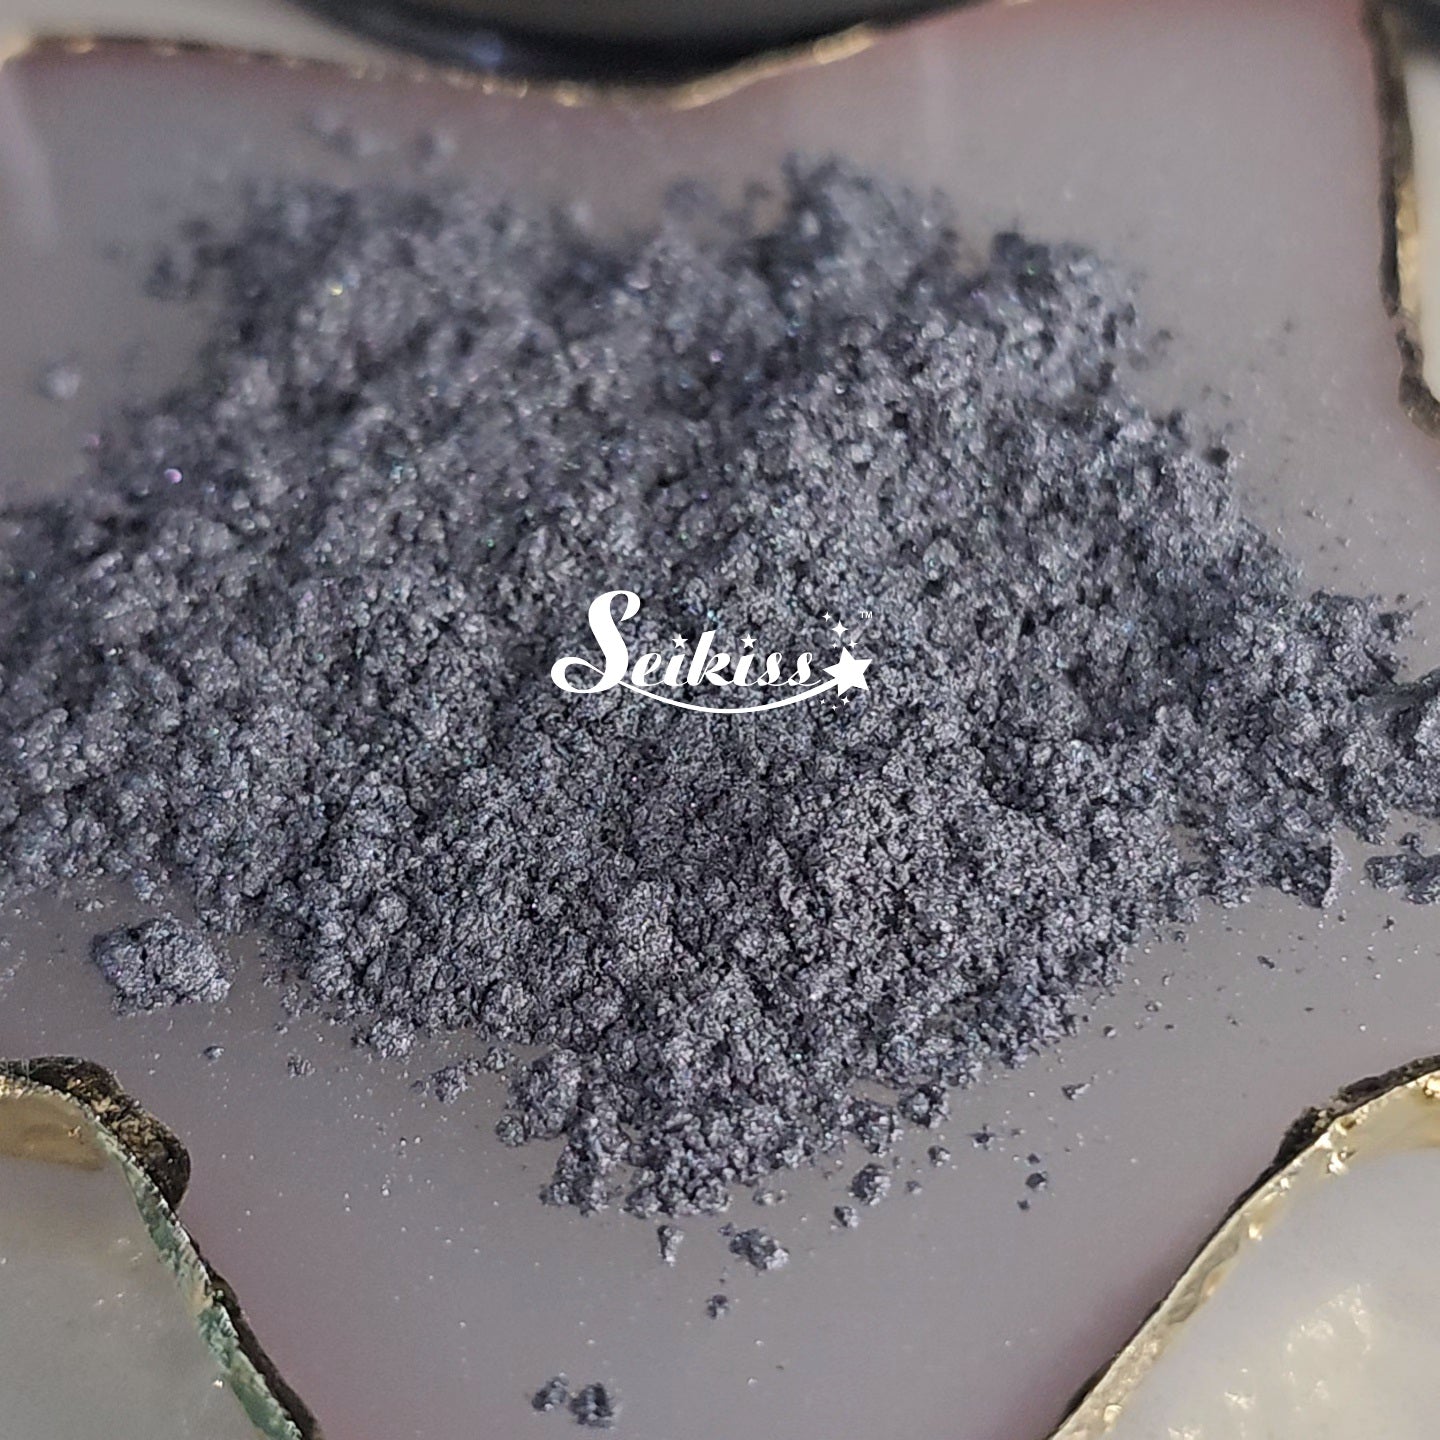 Silver Gray Mica Powder for Resin, Alcohol Ink, Epoxy, Wax Melts - Silver Mica